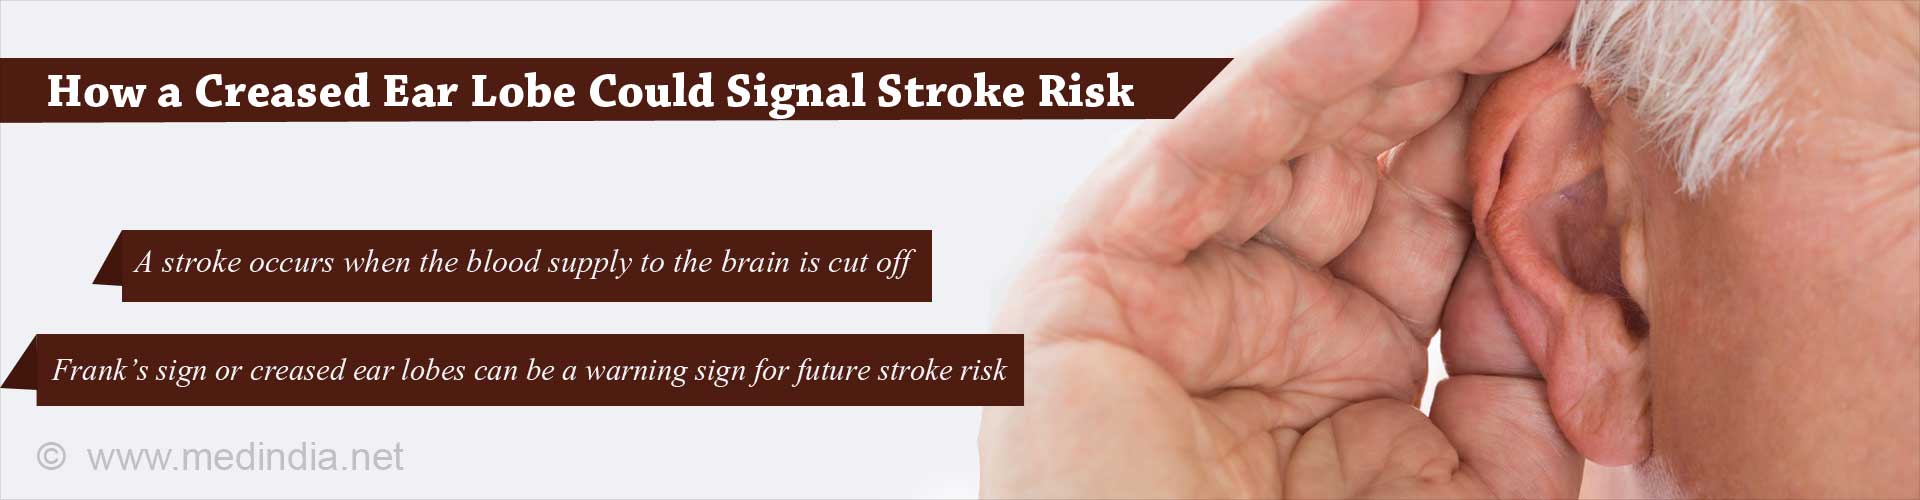 How a Creased Ear Lobe Could Signal Stroke Risk
- A stroke occurs when the blood supply to the brain is cut off
- Frank''s sign or creased ear lobes can be a warning sign for future stroke risk